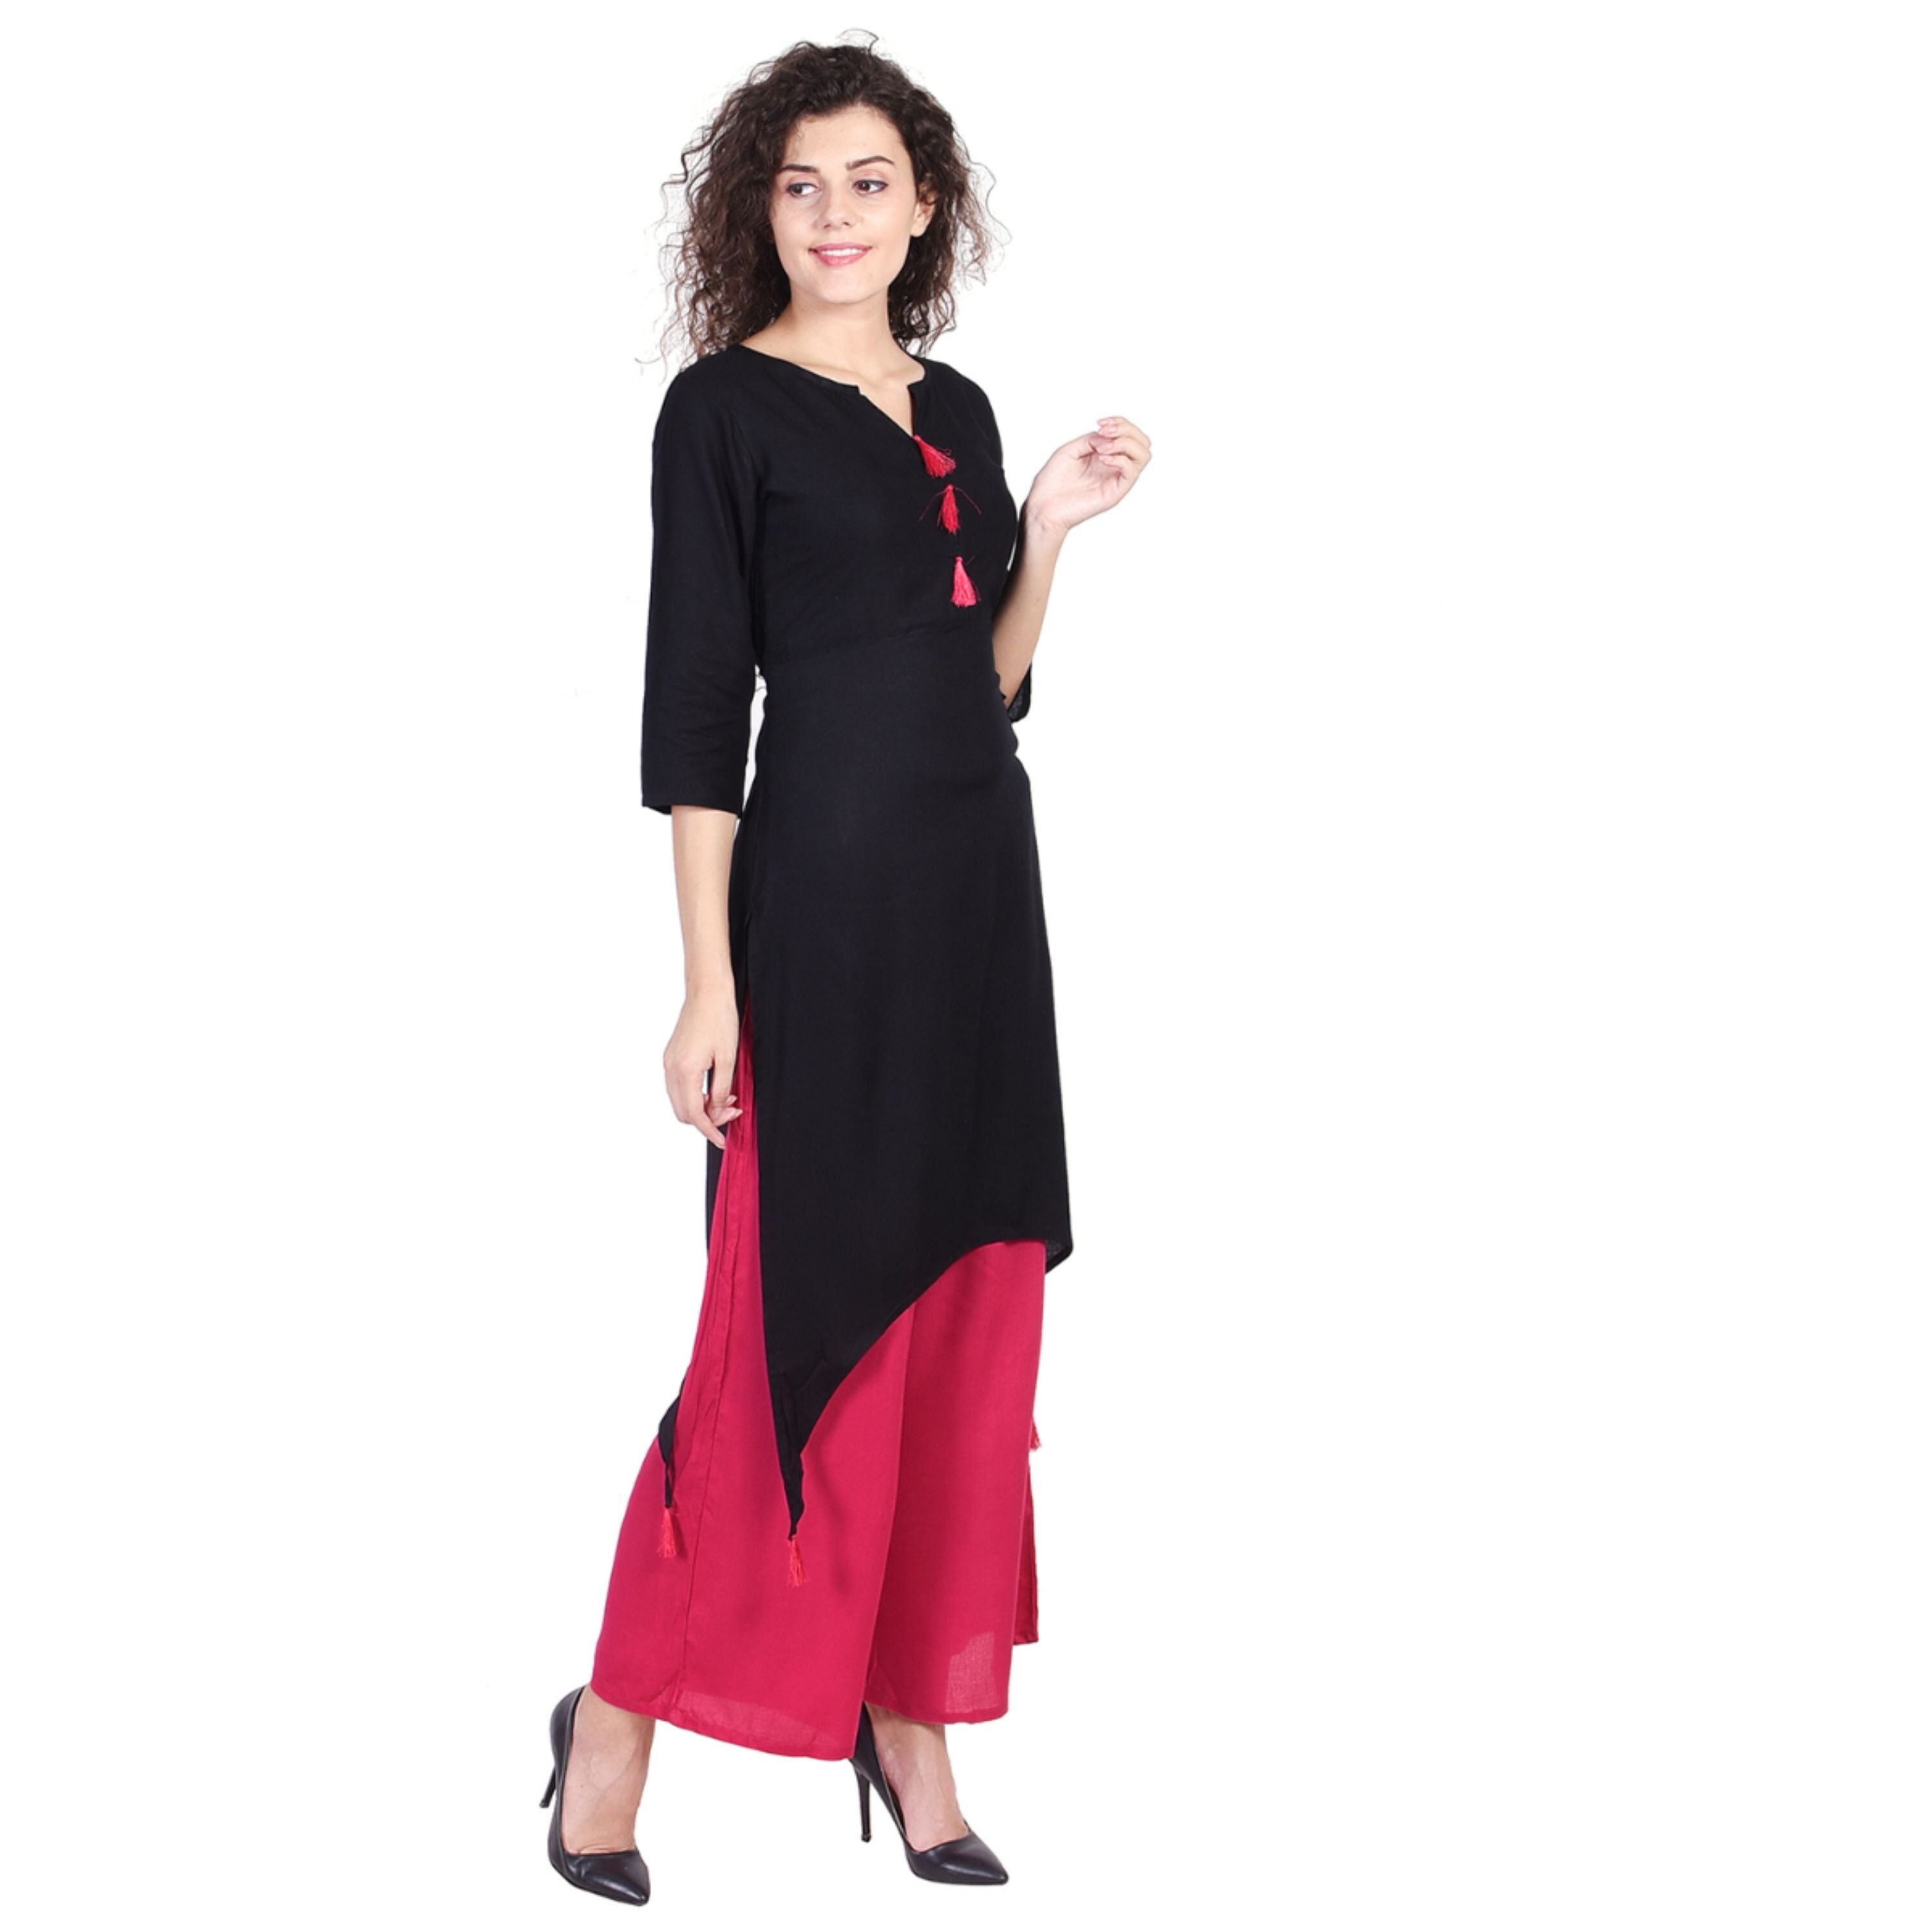 Discover more than 163 red and black kurti design latest